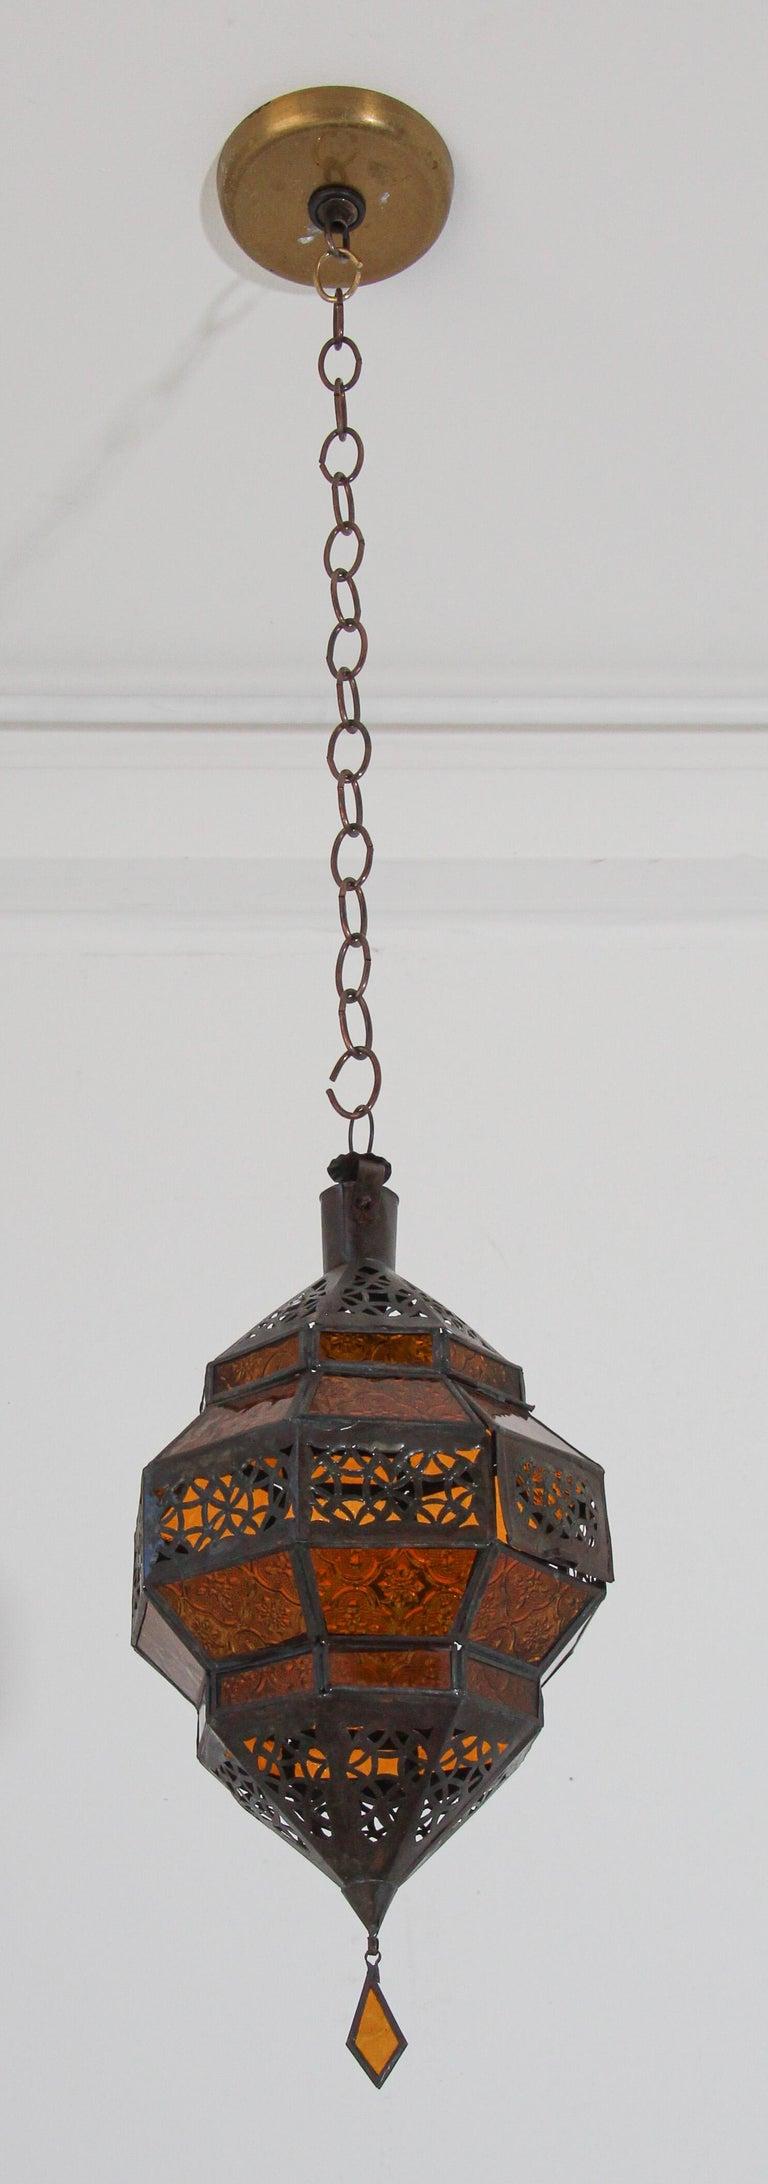 Moroccan metal and amber glass lantern in diamond shape.
Moroccan lantern in octagonal shape with rust color metal finish and amber glass.
The top and bottom hand-cut openwork metal with Moorish design.
This Moroccan lantern when lit will cast light